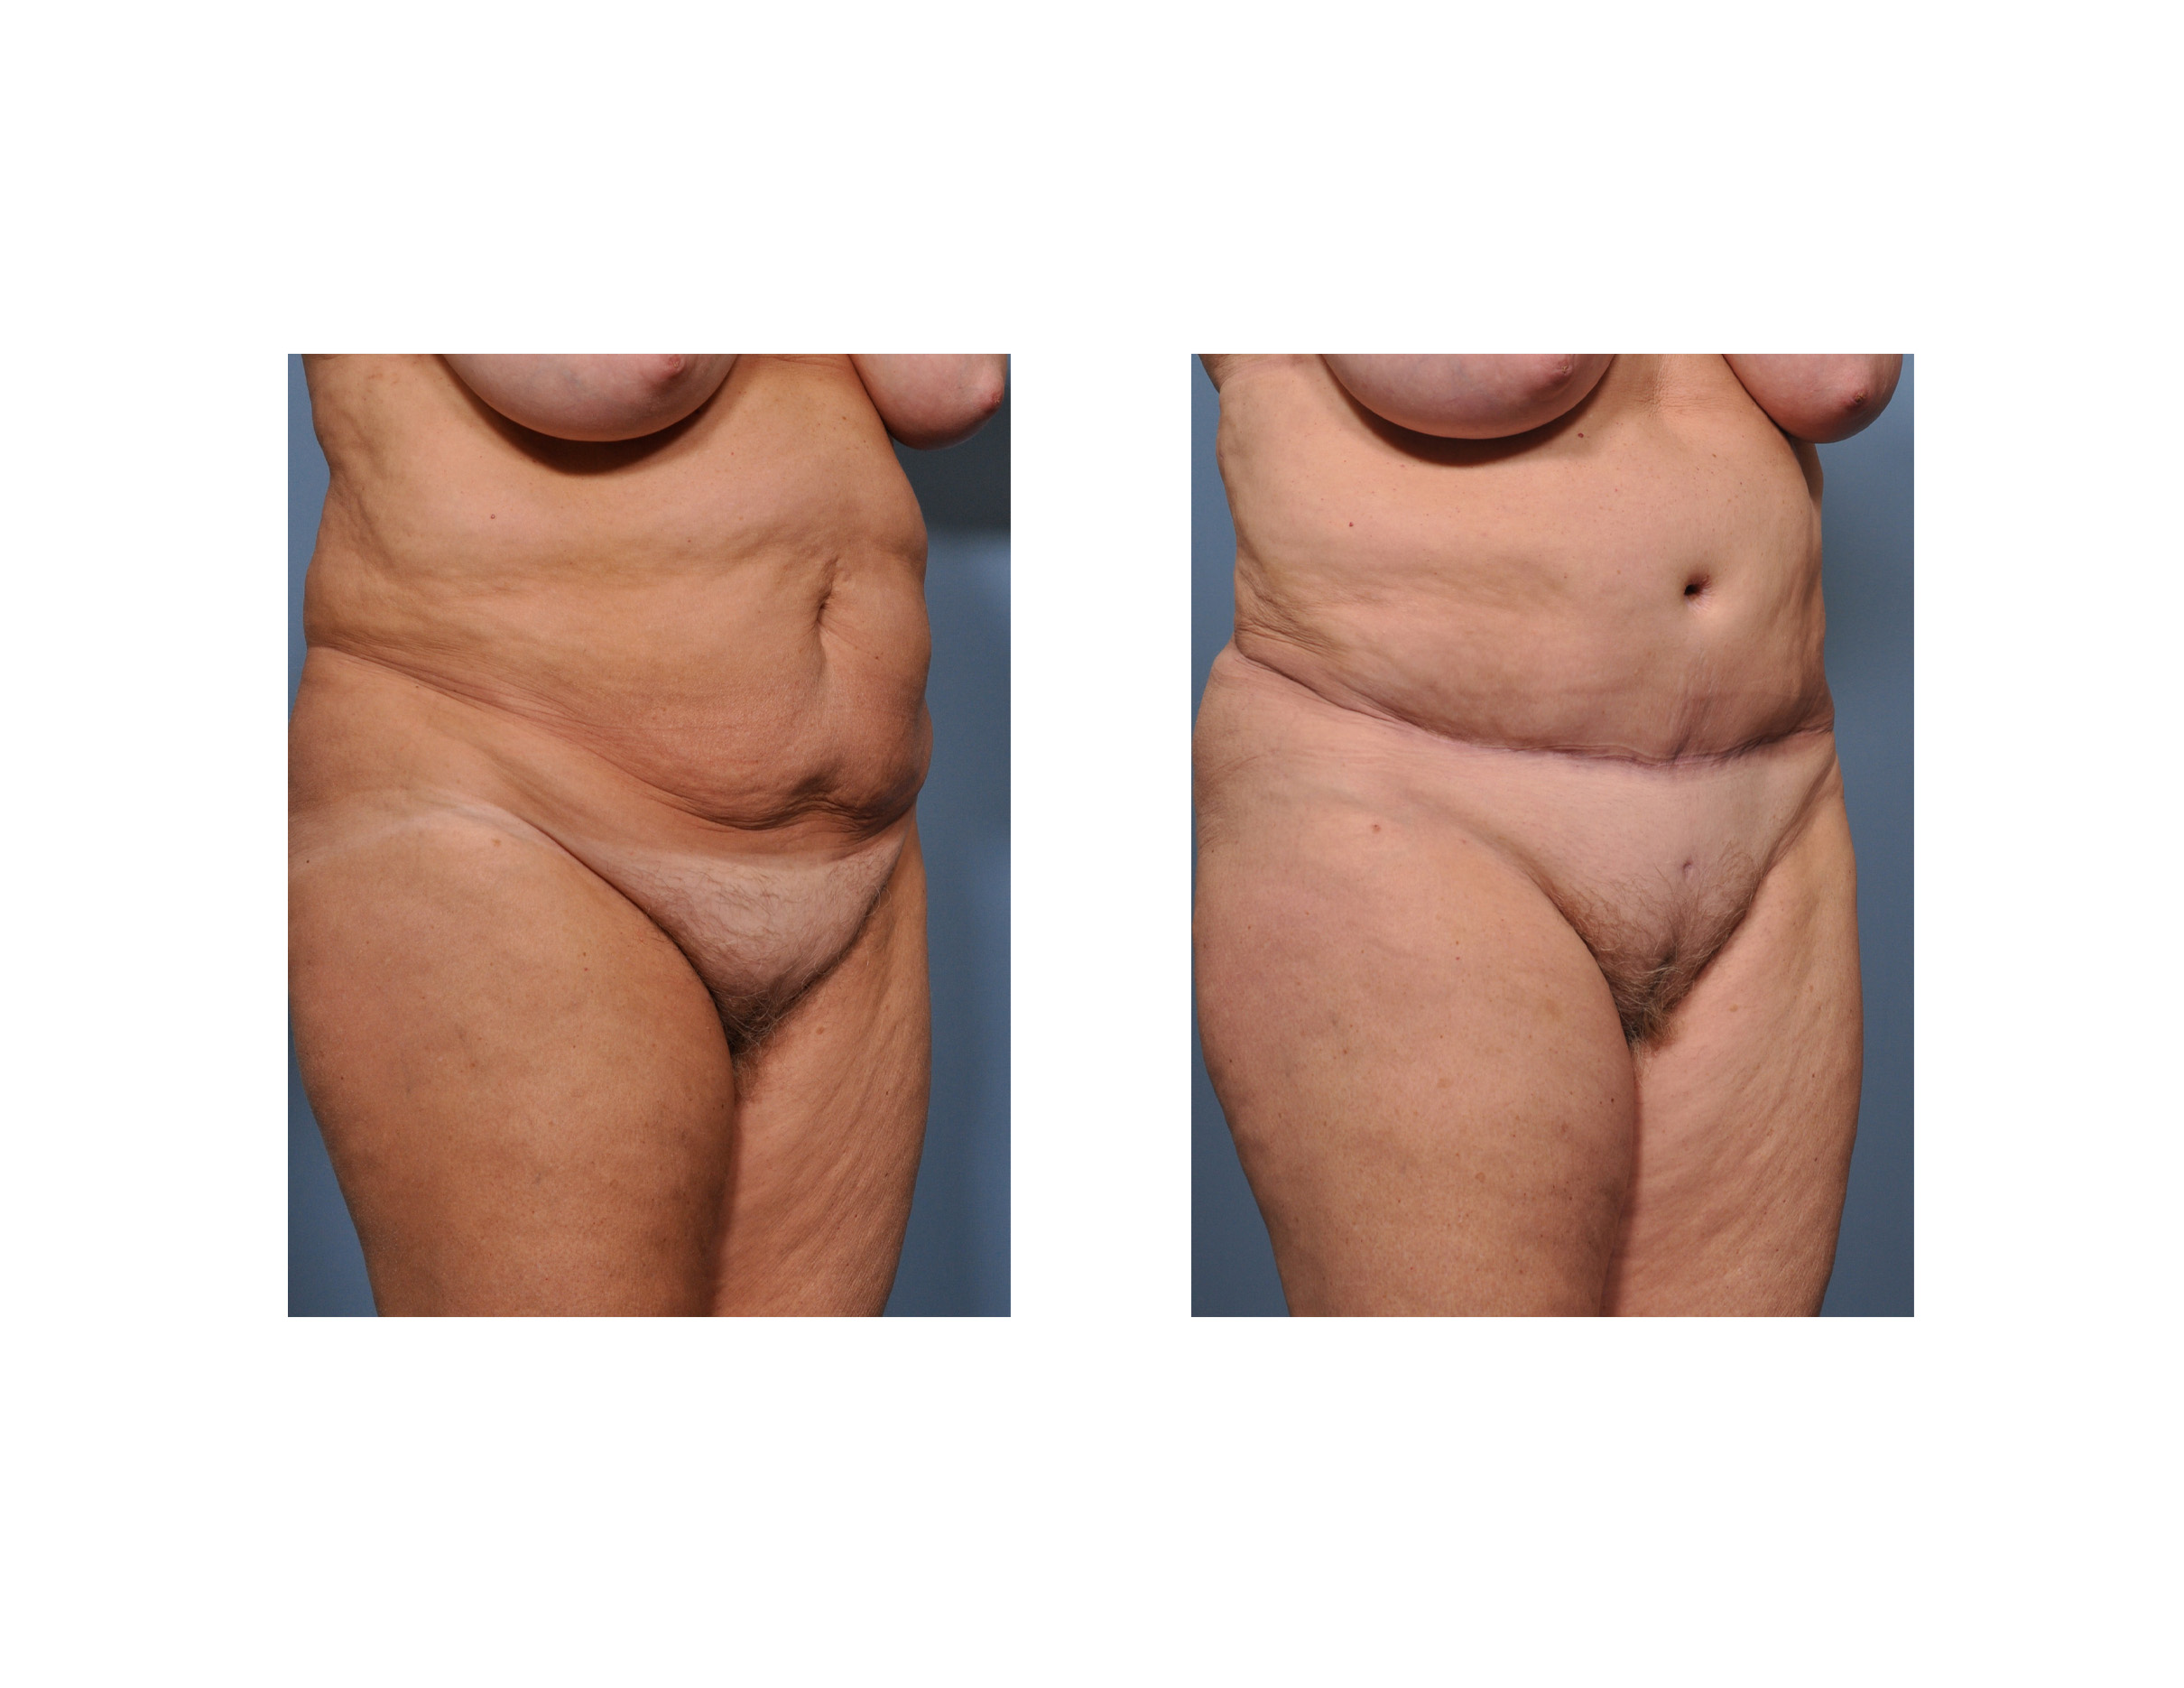 https://exploreplasticsurgery.com/wp-content/uploads/2012/01/tummy-tuck-with-pubic-liposuction-results-oblique-view-dr-barry-eppley-indianapolis.jpg